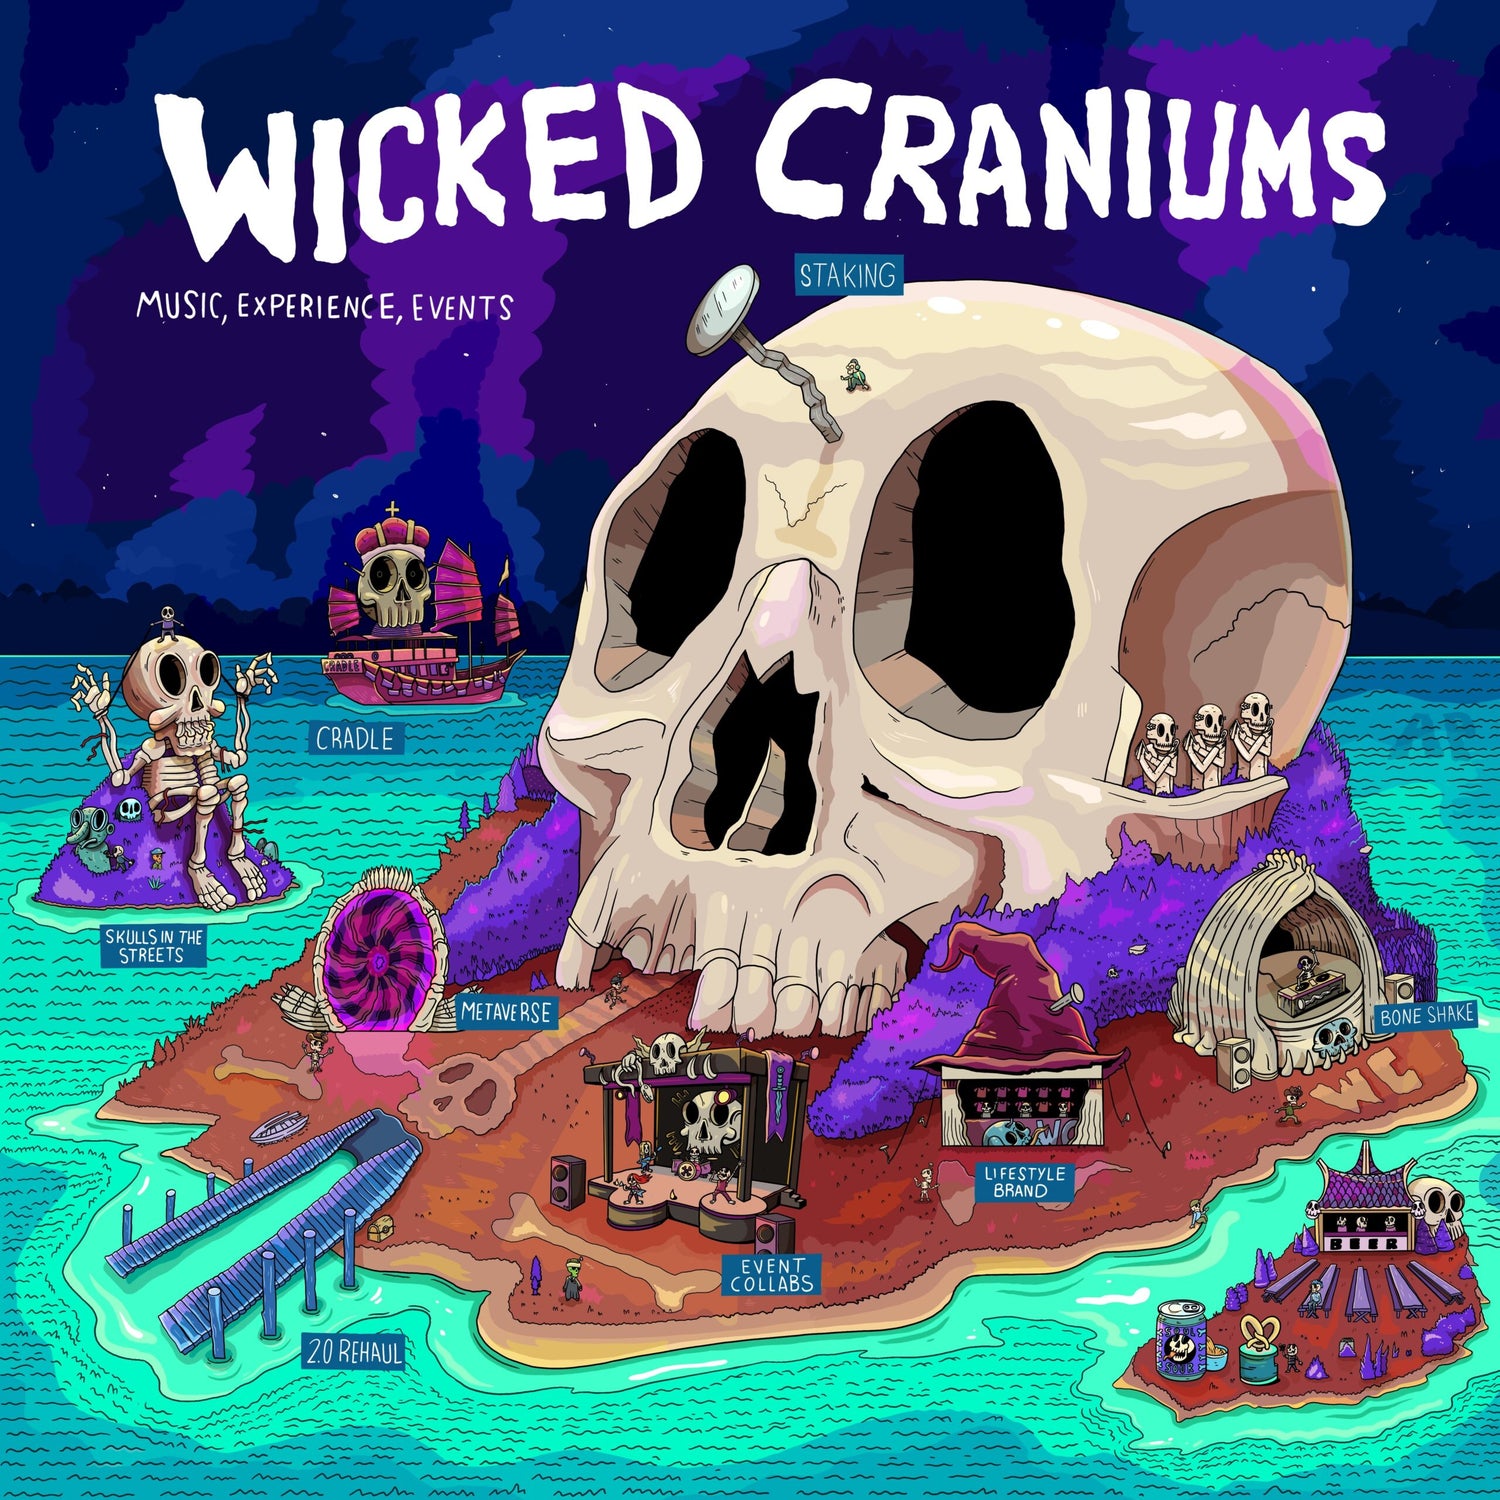 Wicked Craniums bridges the metaverse with real-world utility in a revolutionary partnership with 5B Artists & Media